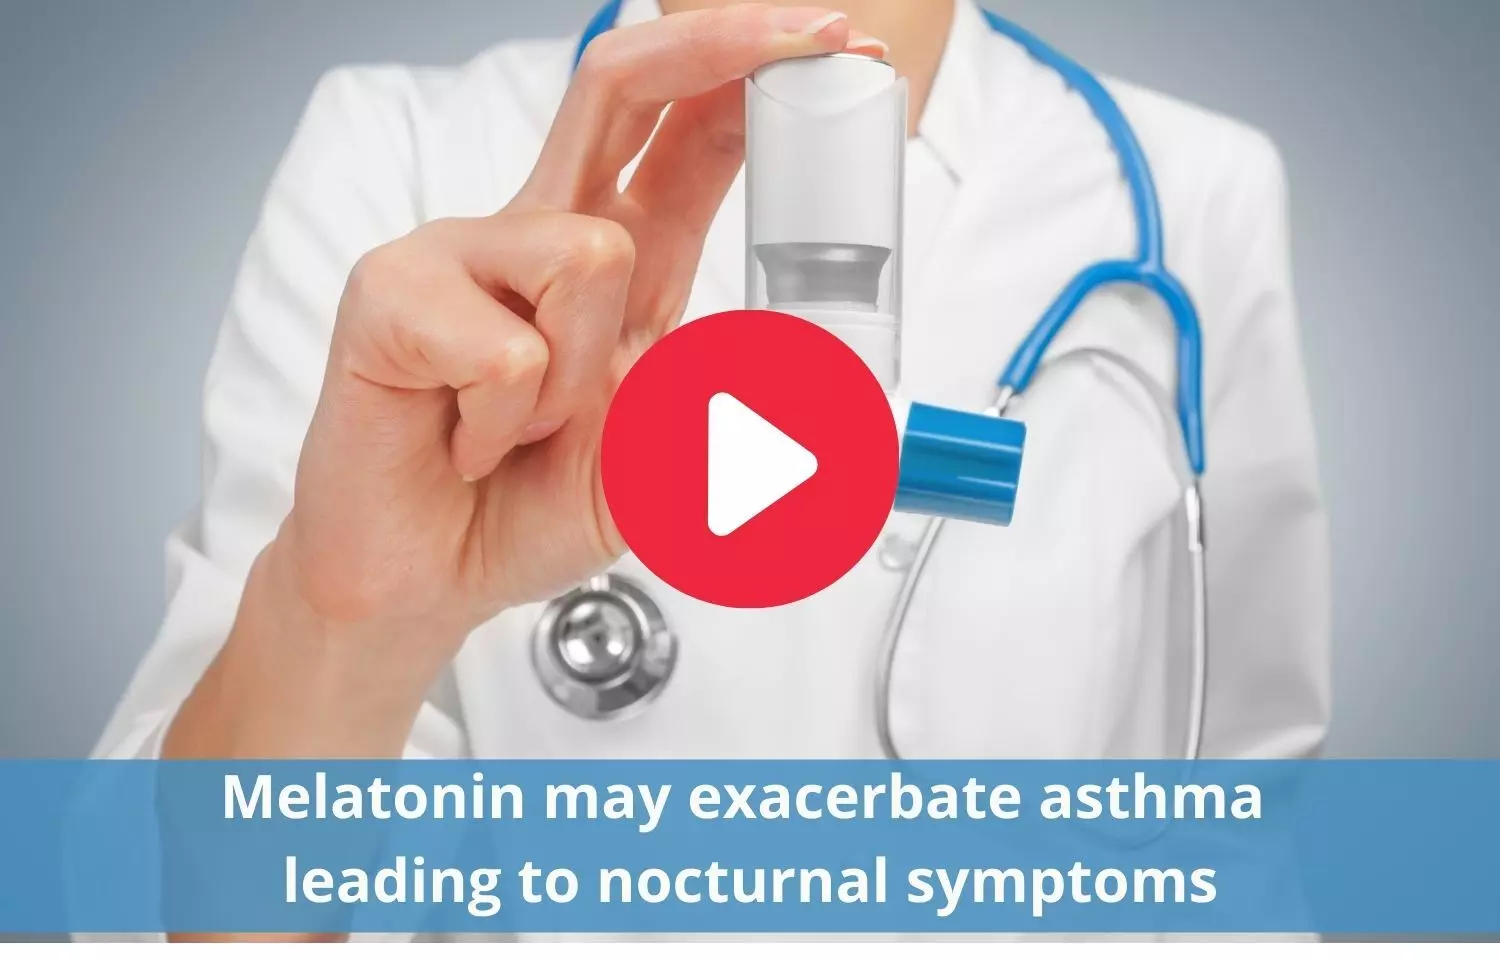 Asthma exacerbation with melatonin can lead to nocturnal symptoms